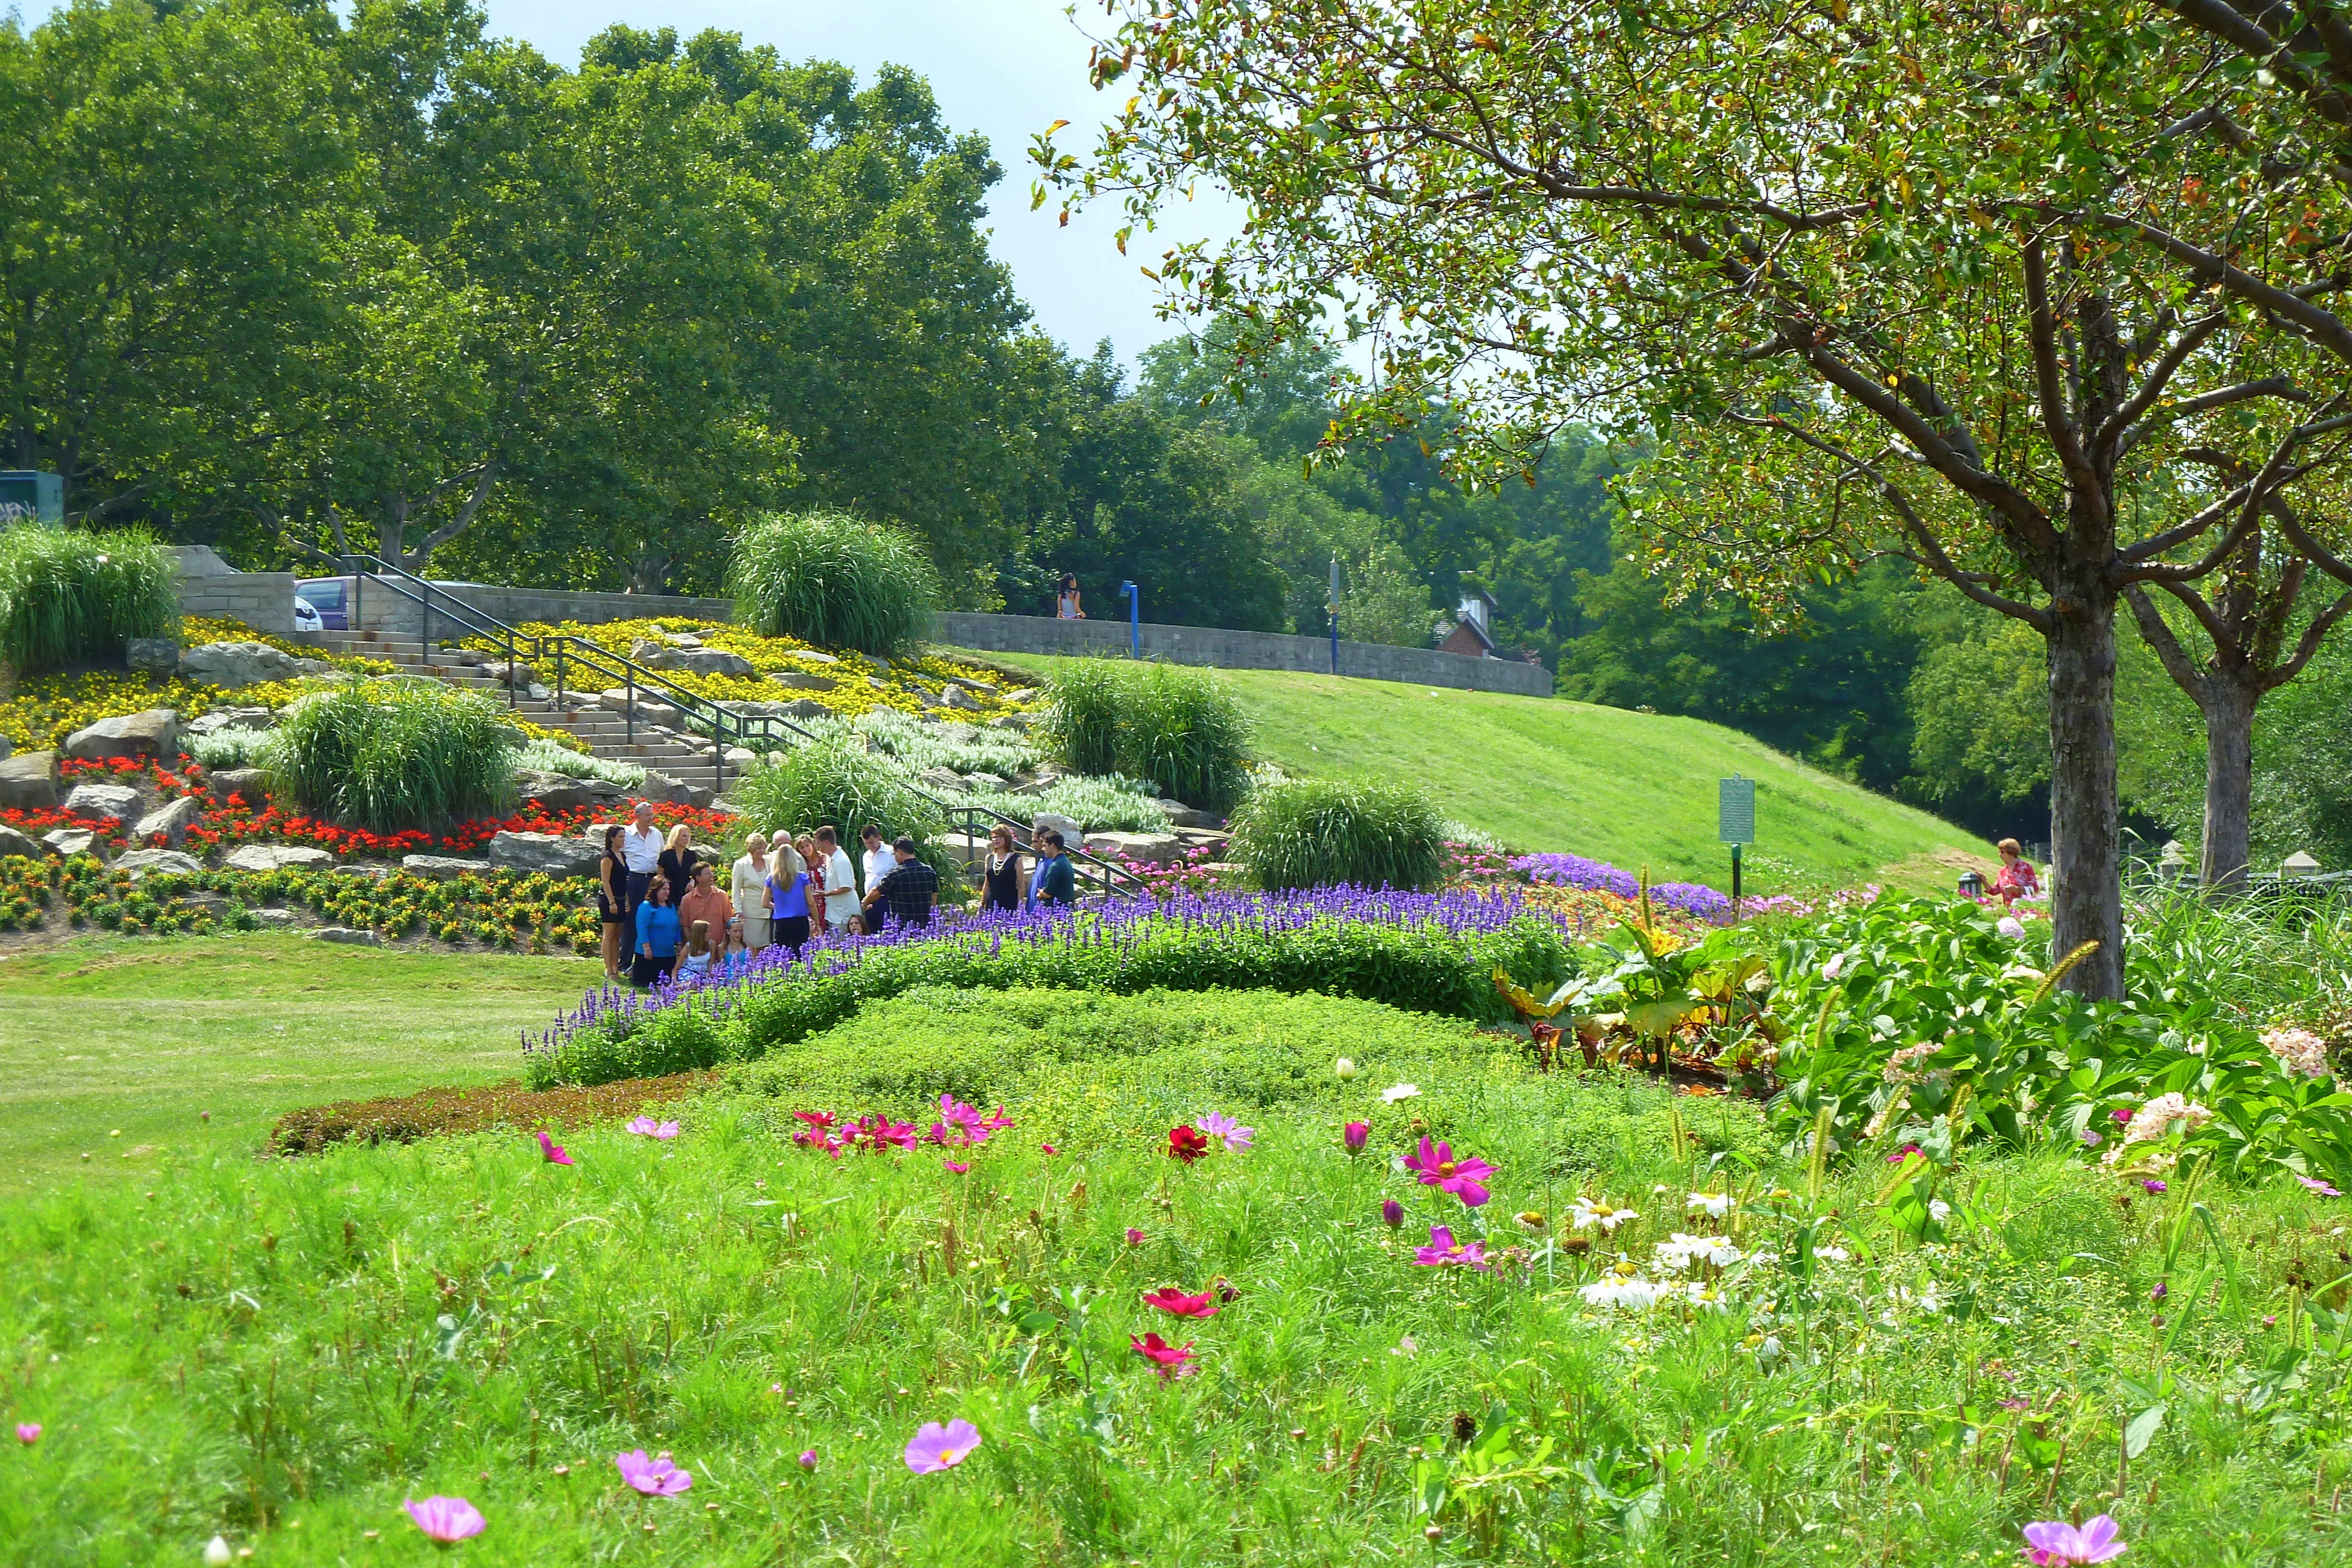 Hill with a pathway and garden with variety of flowers.